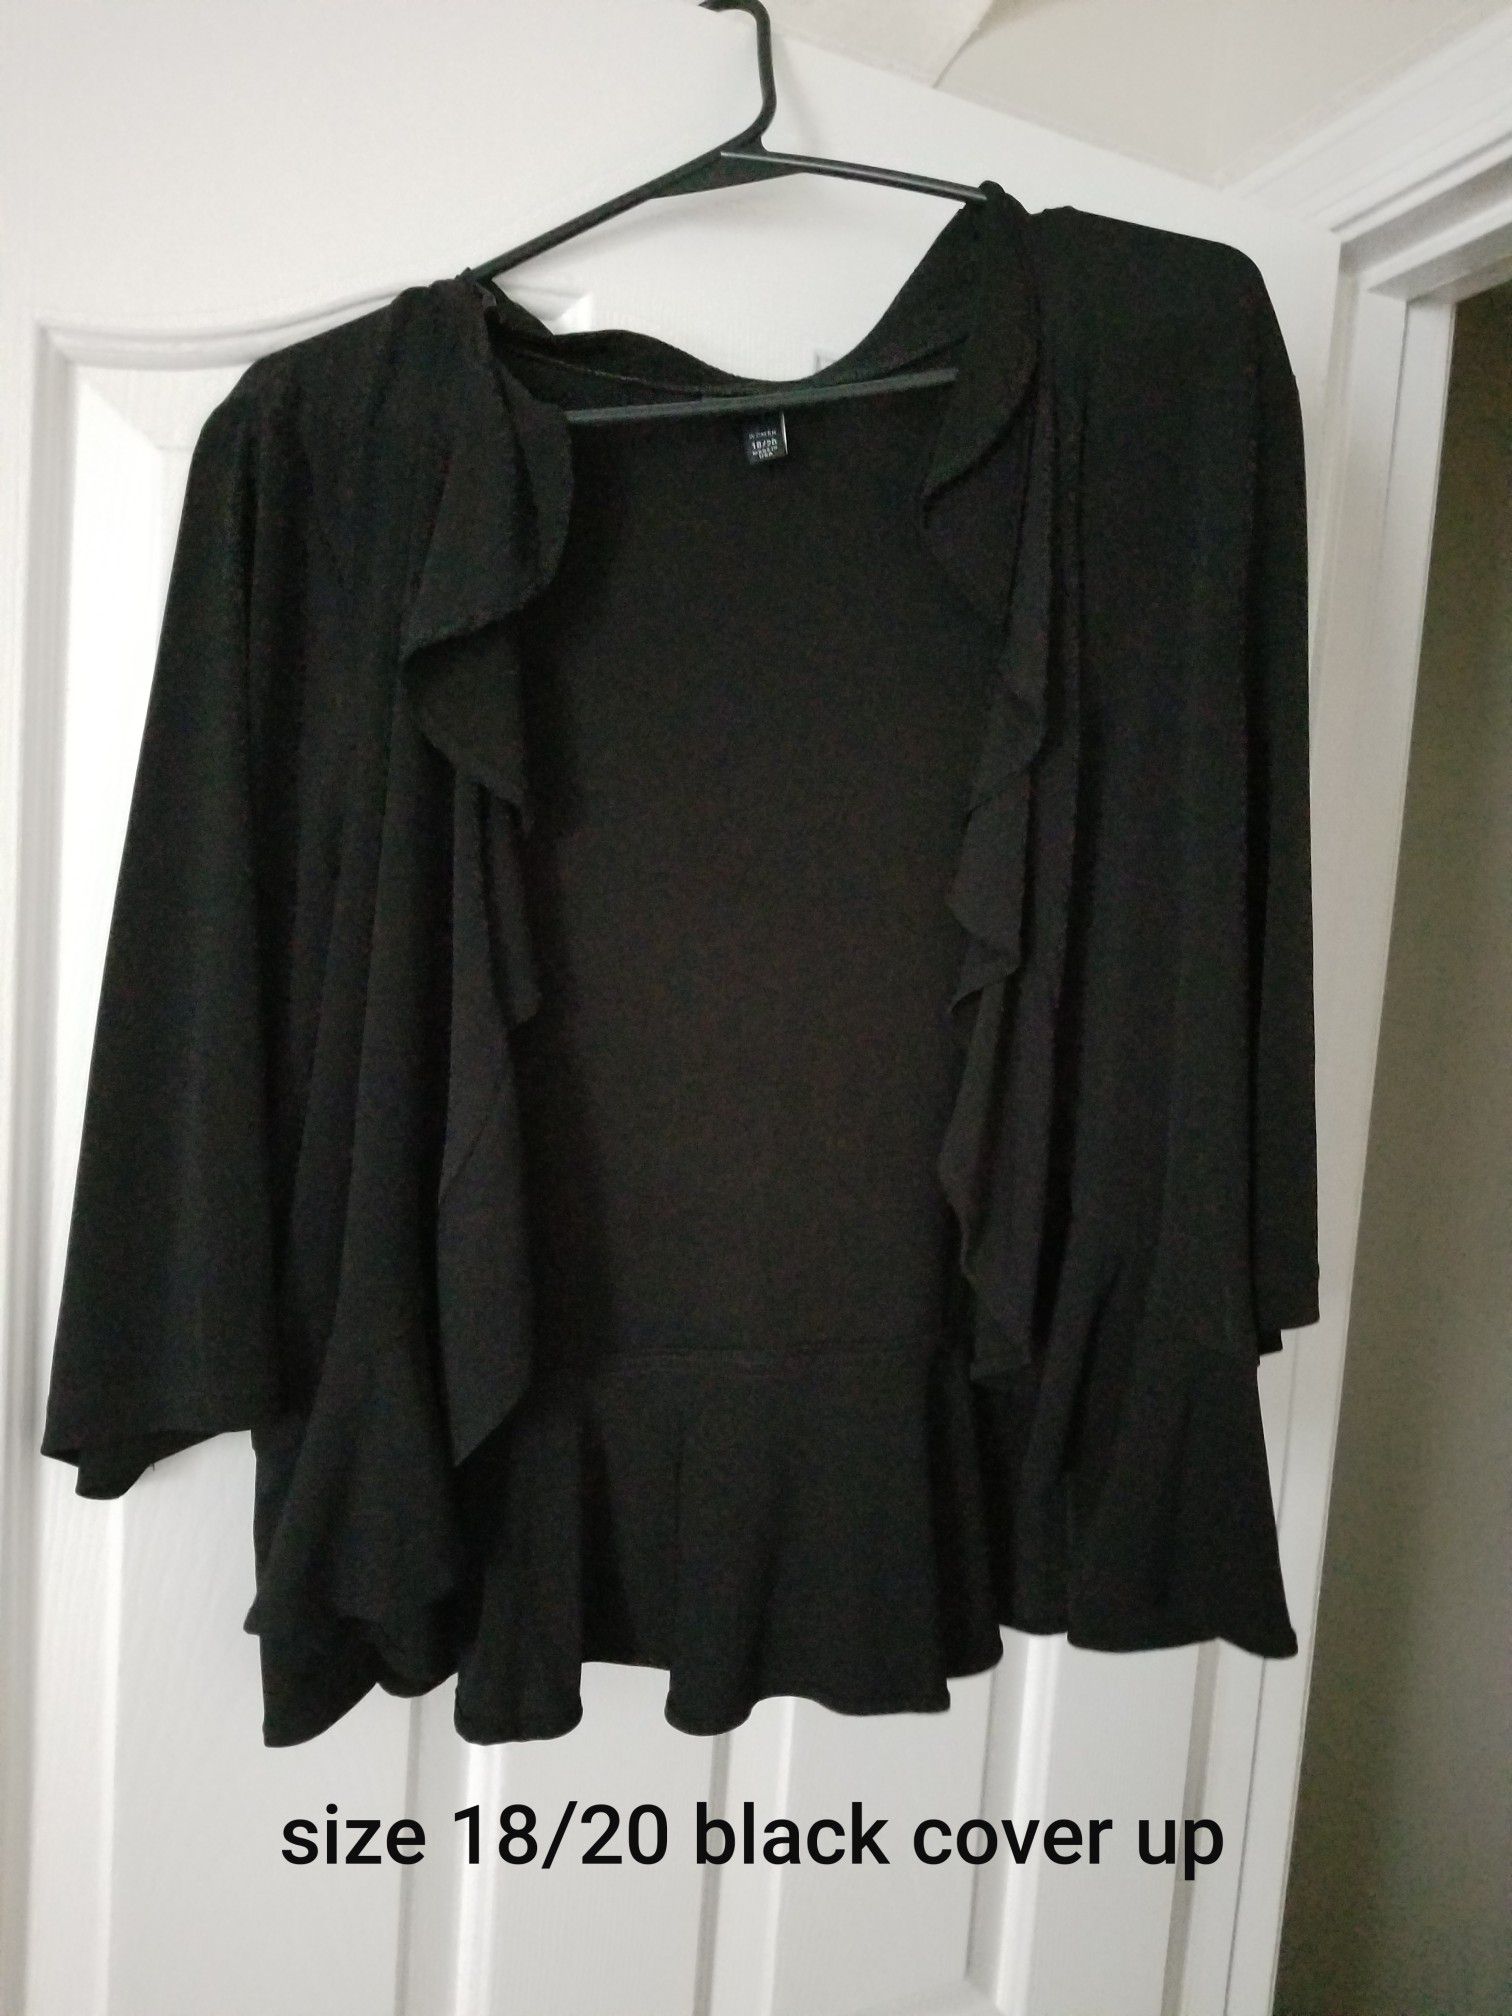 Size 18/20 black cover up